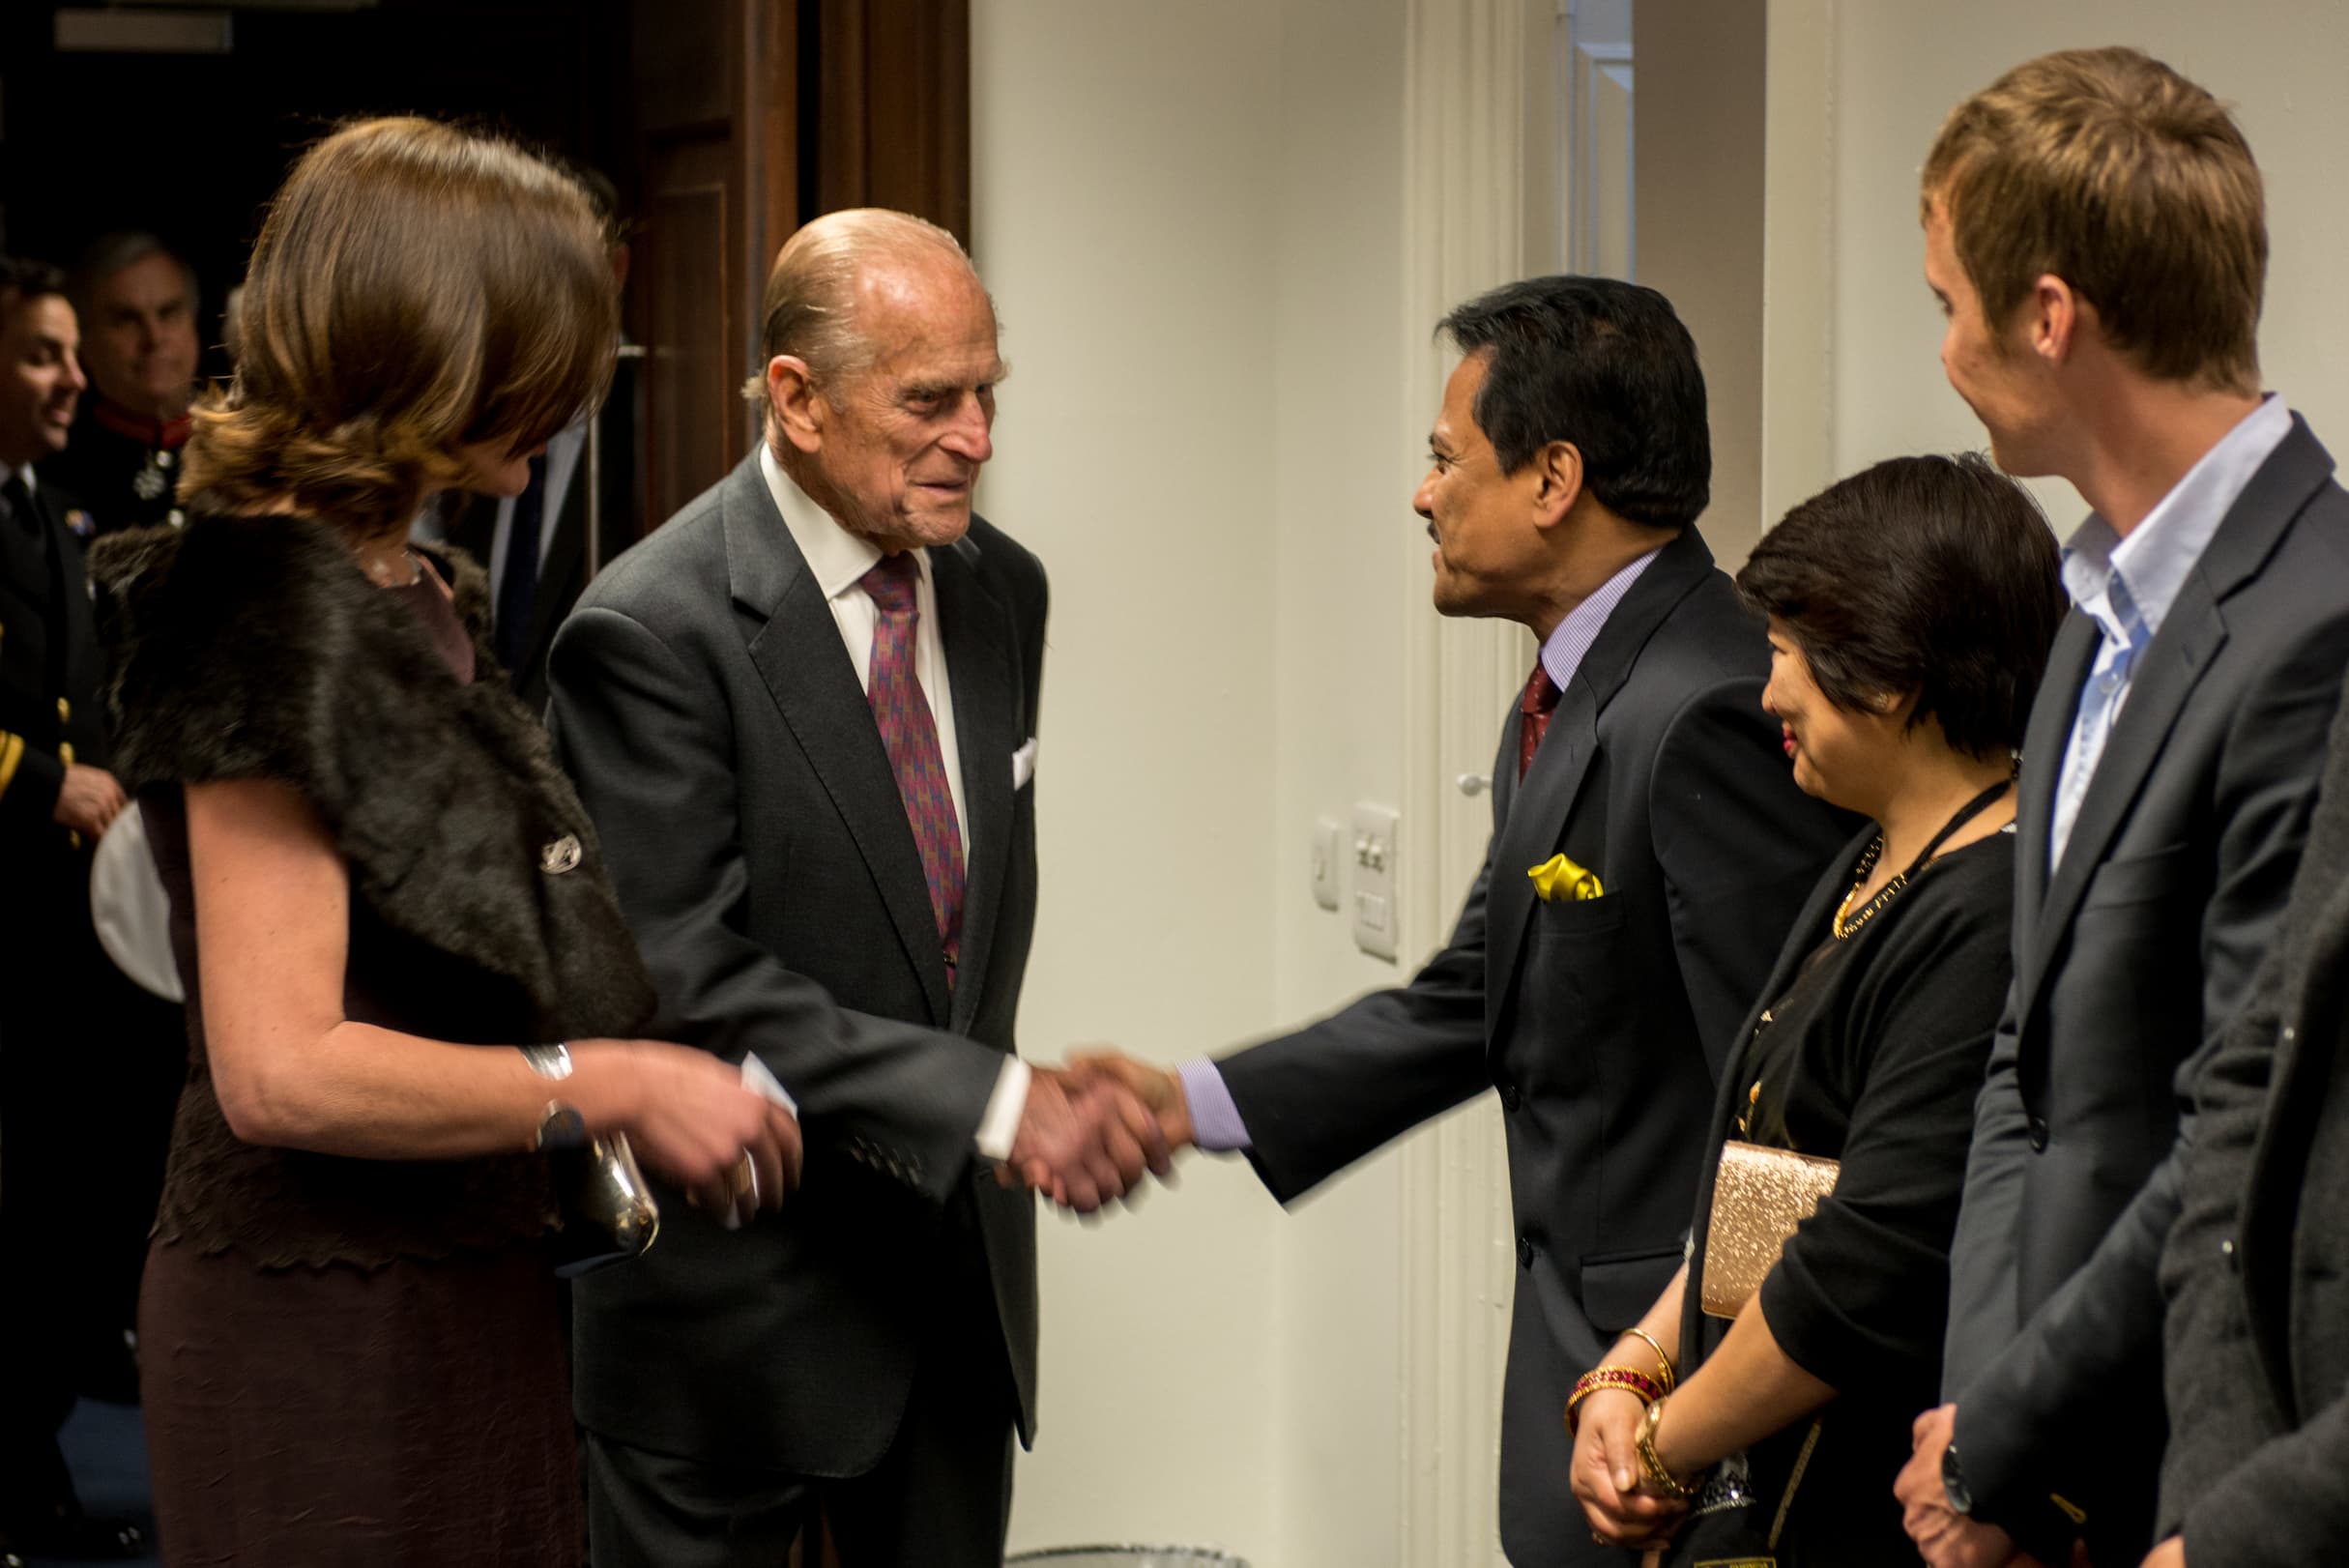 HRH Prince Philip at the Society for the Mount Everest 60th Anniversary event courtesy of James Finlay.